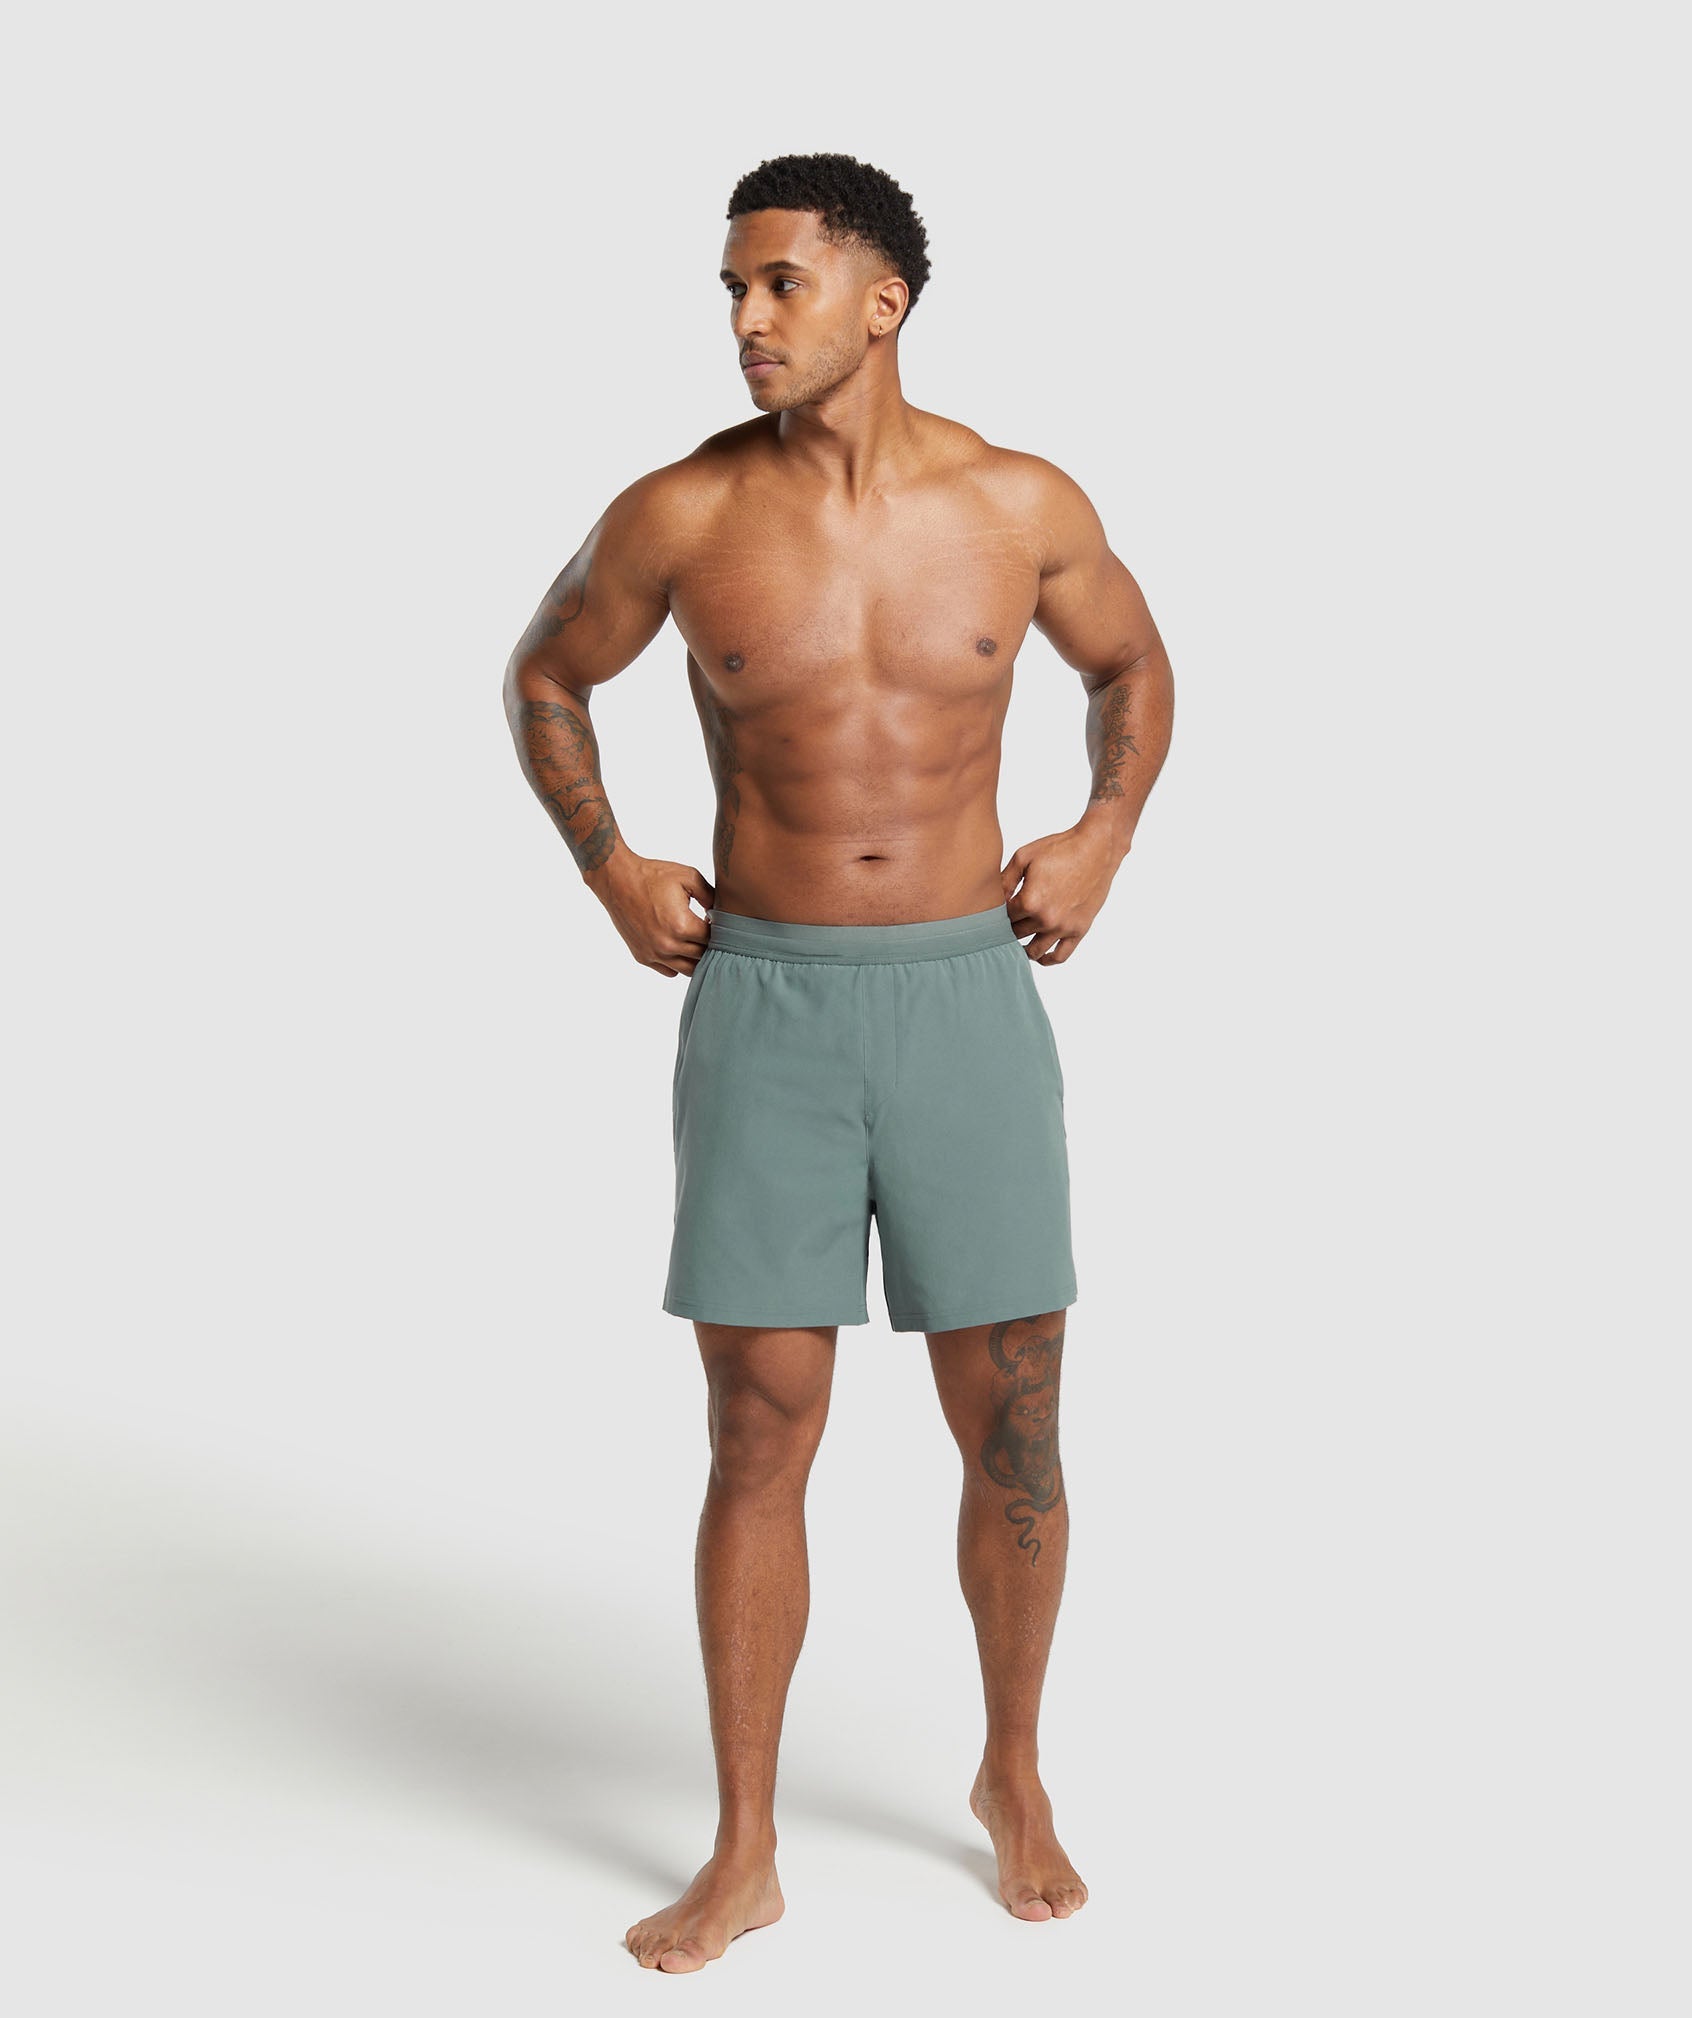 Land to Water 6" Shorts in Cargo Teal - view 4